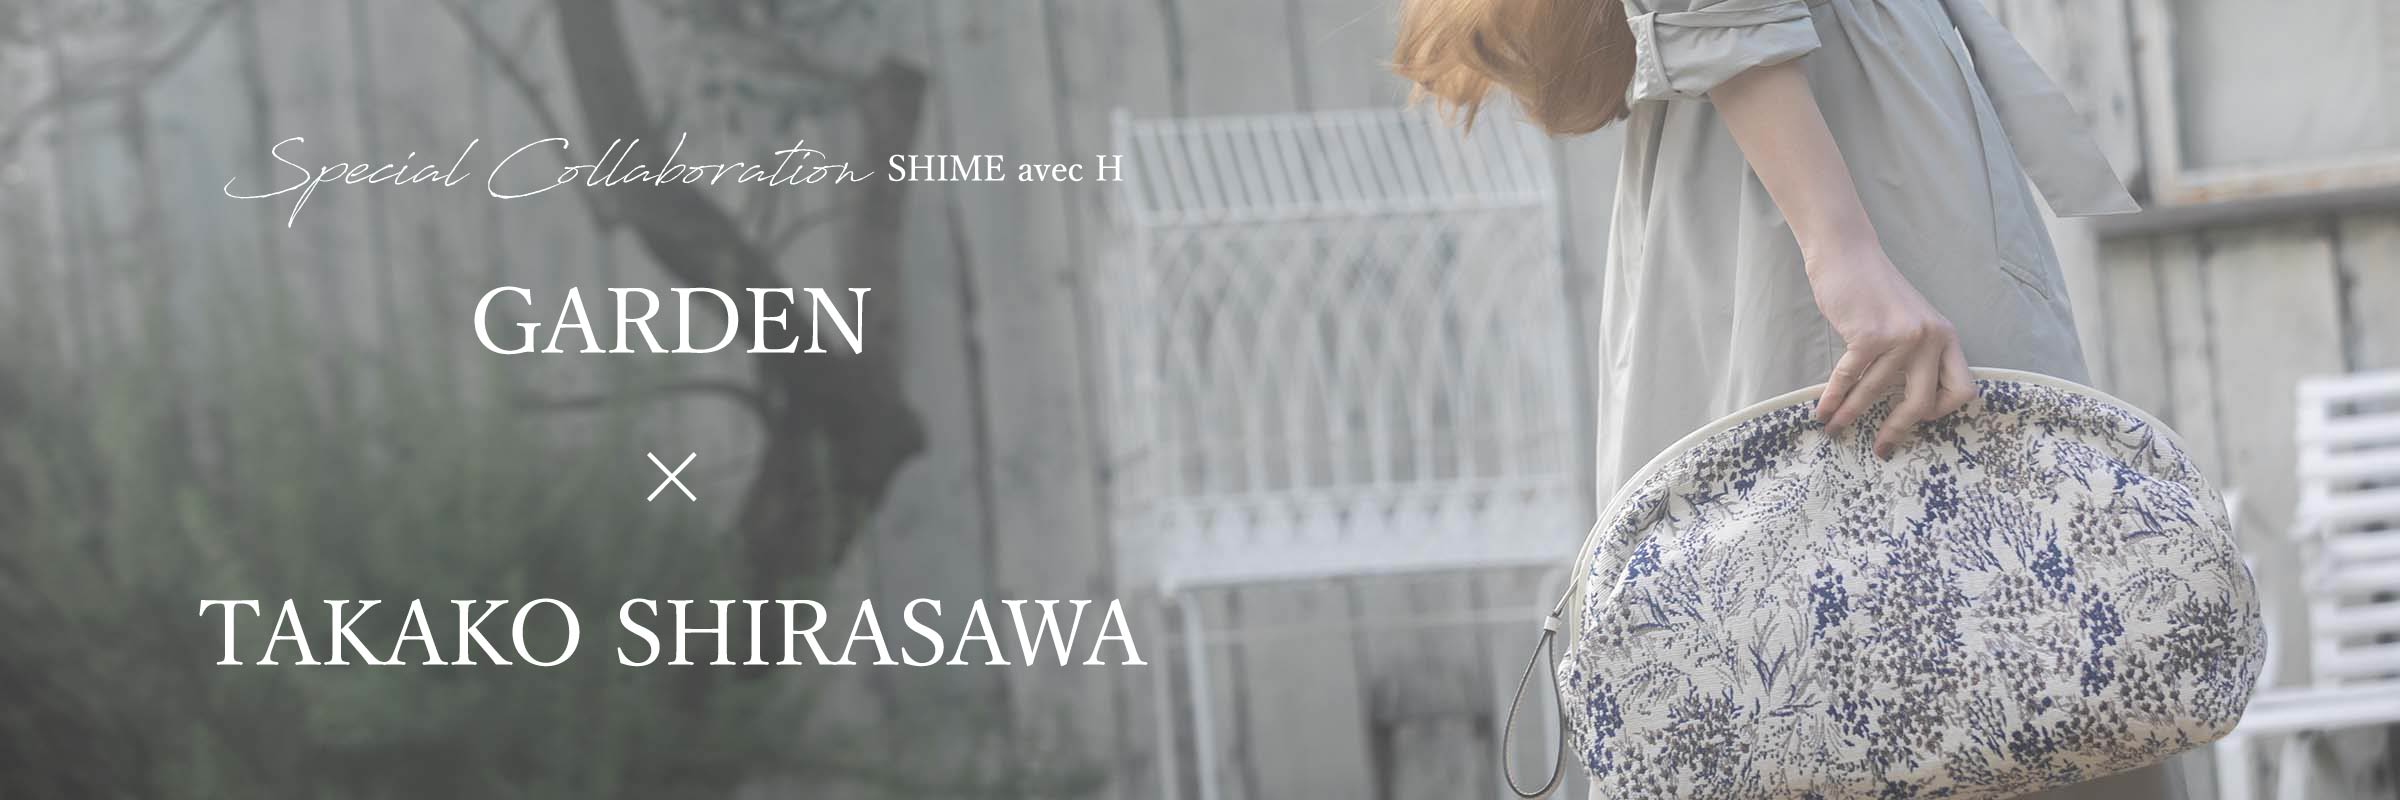 Special Collaboration SHIME avec H